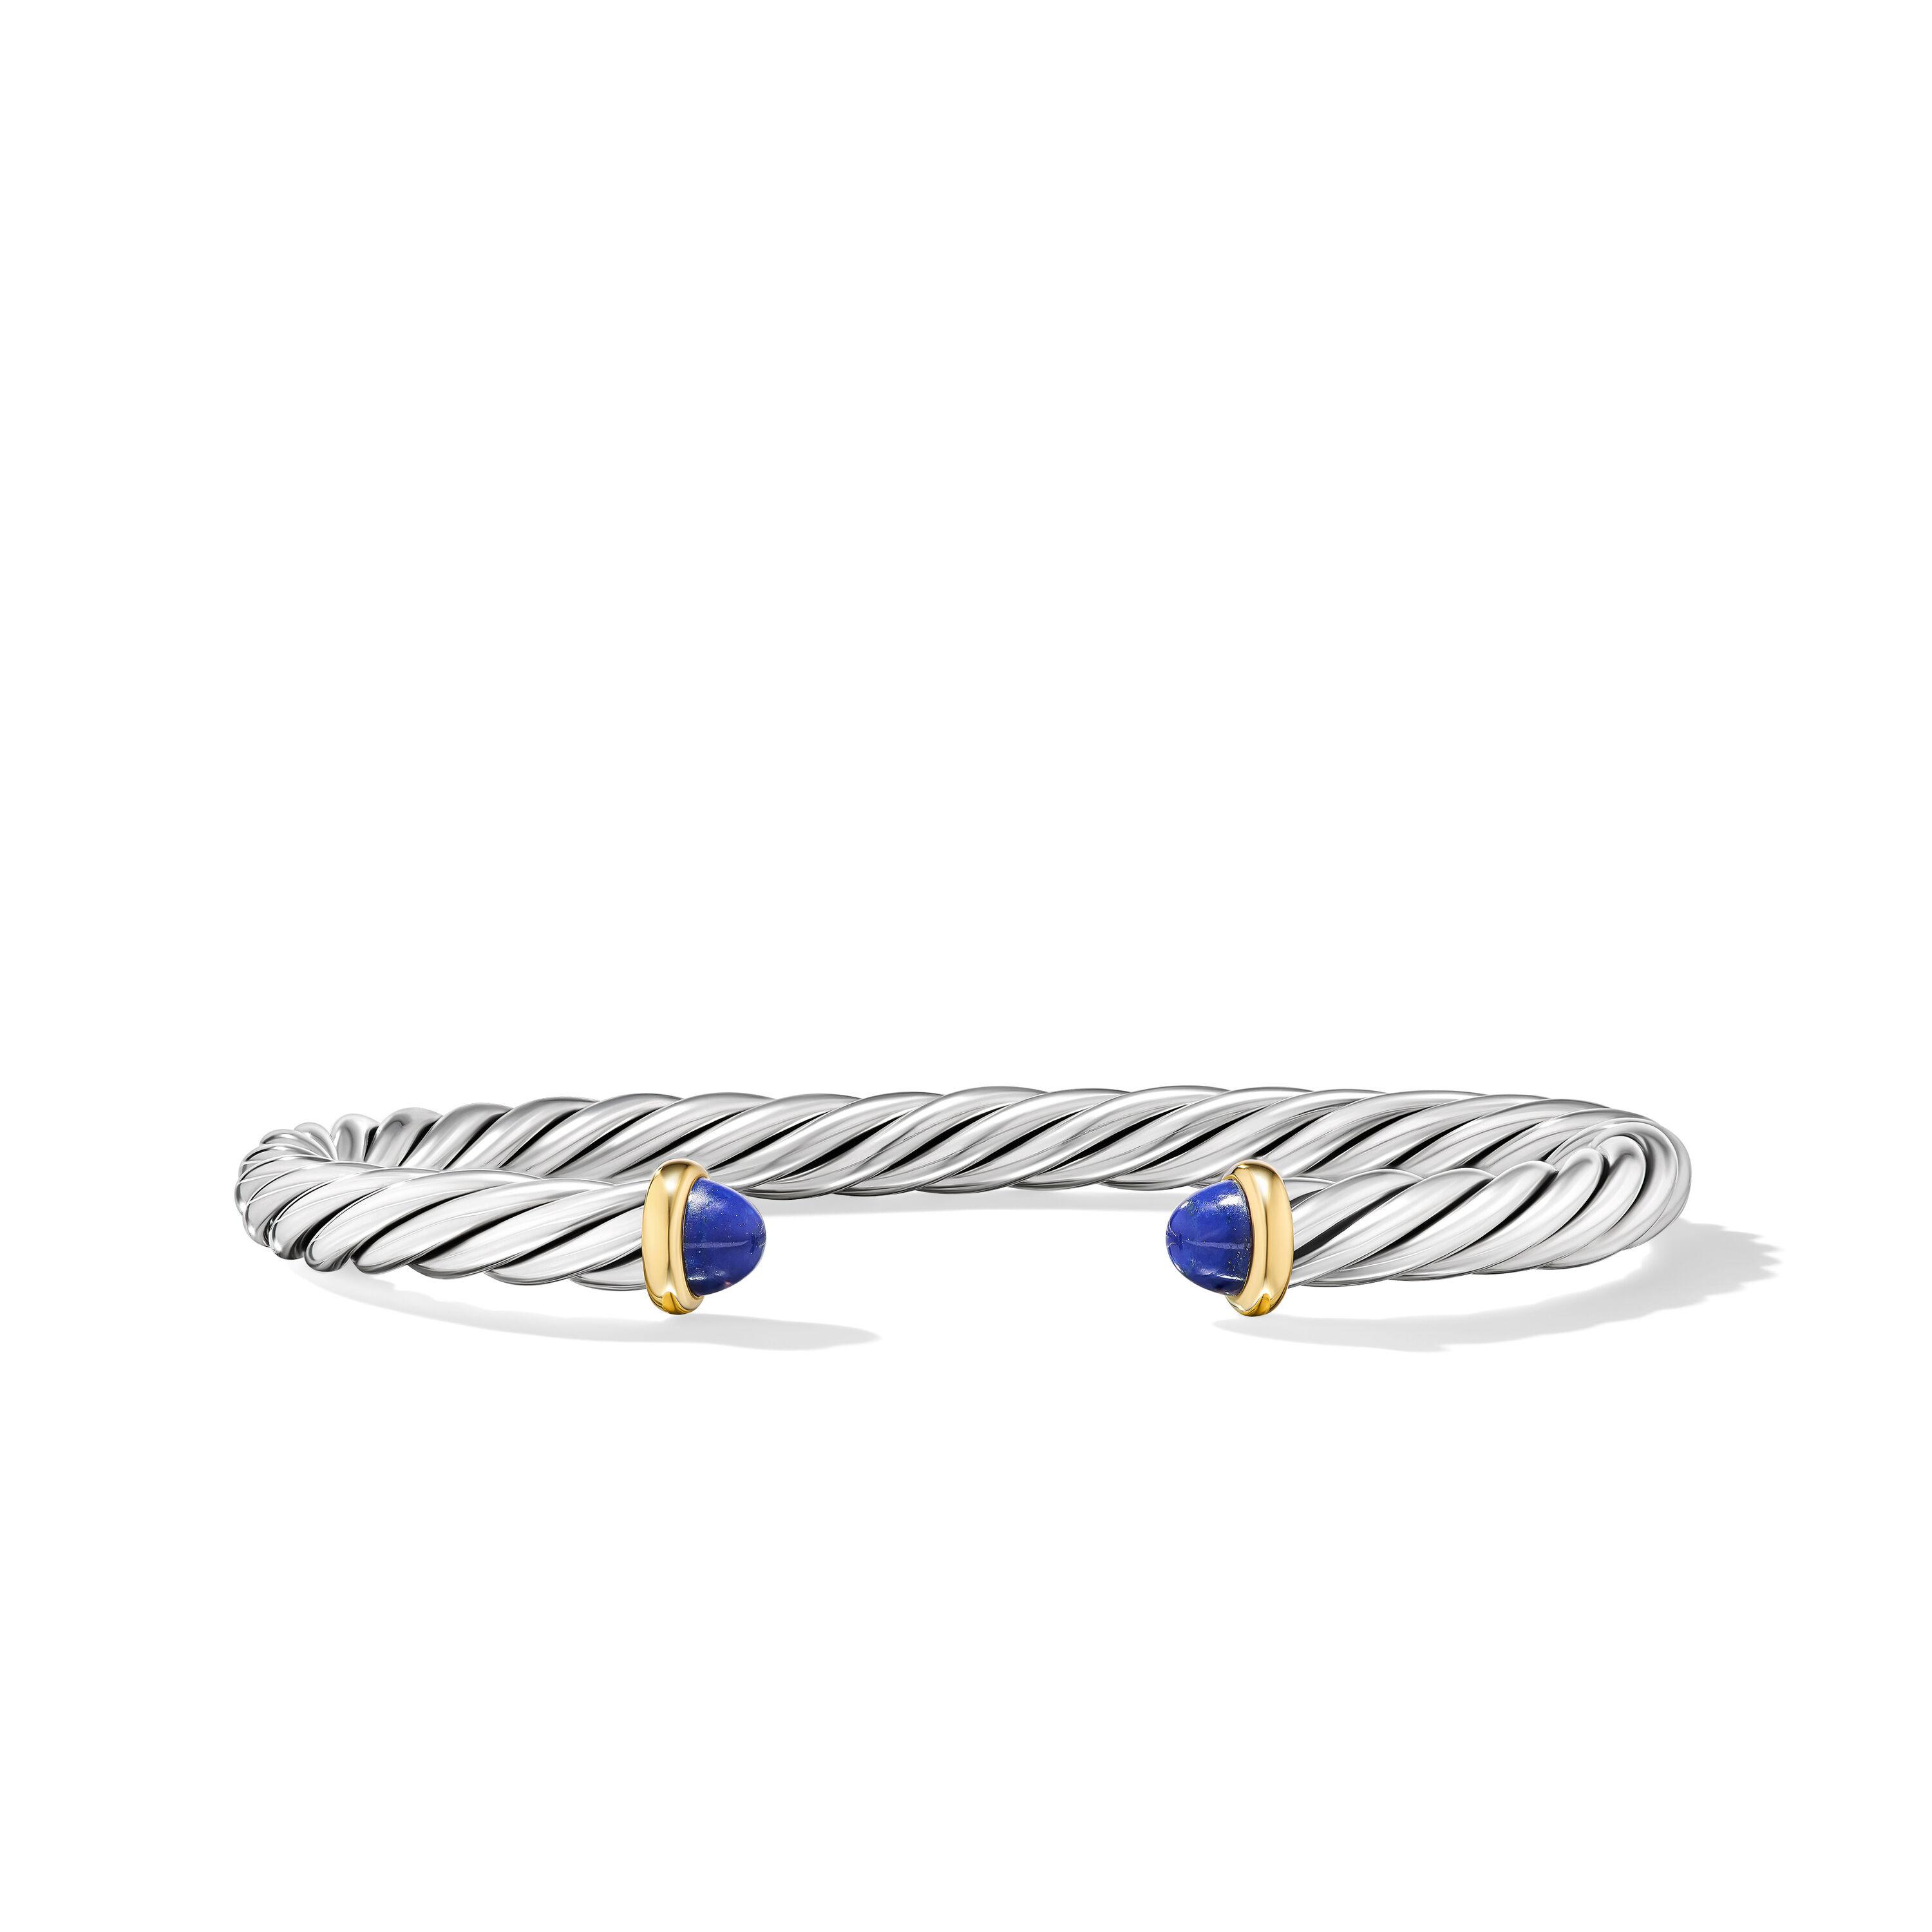 David Yurman 6mm Cable Cuff Bracelet in Sterling Silver with 14K Yellow Gold and Lapis, Large 0